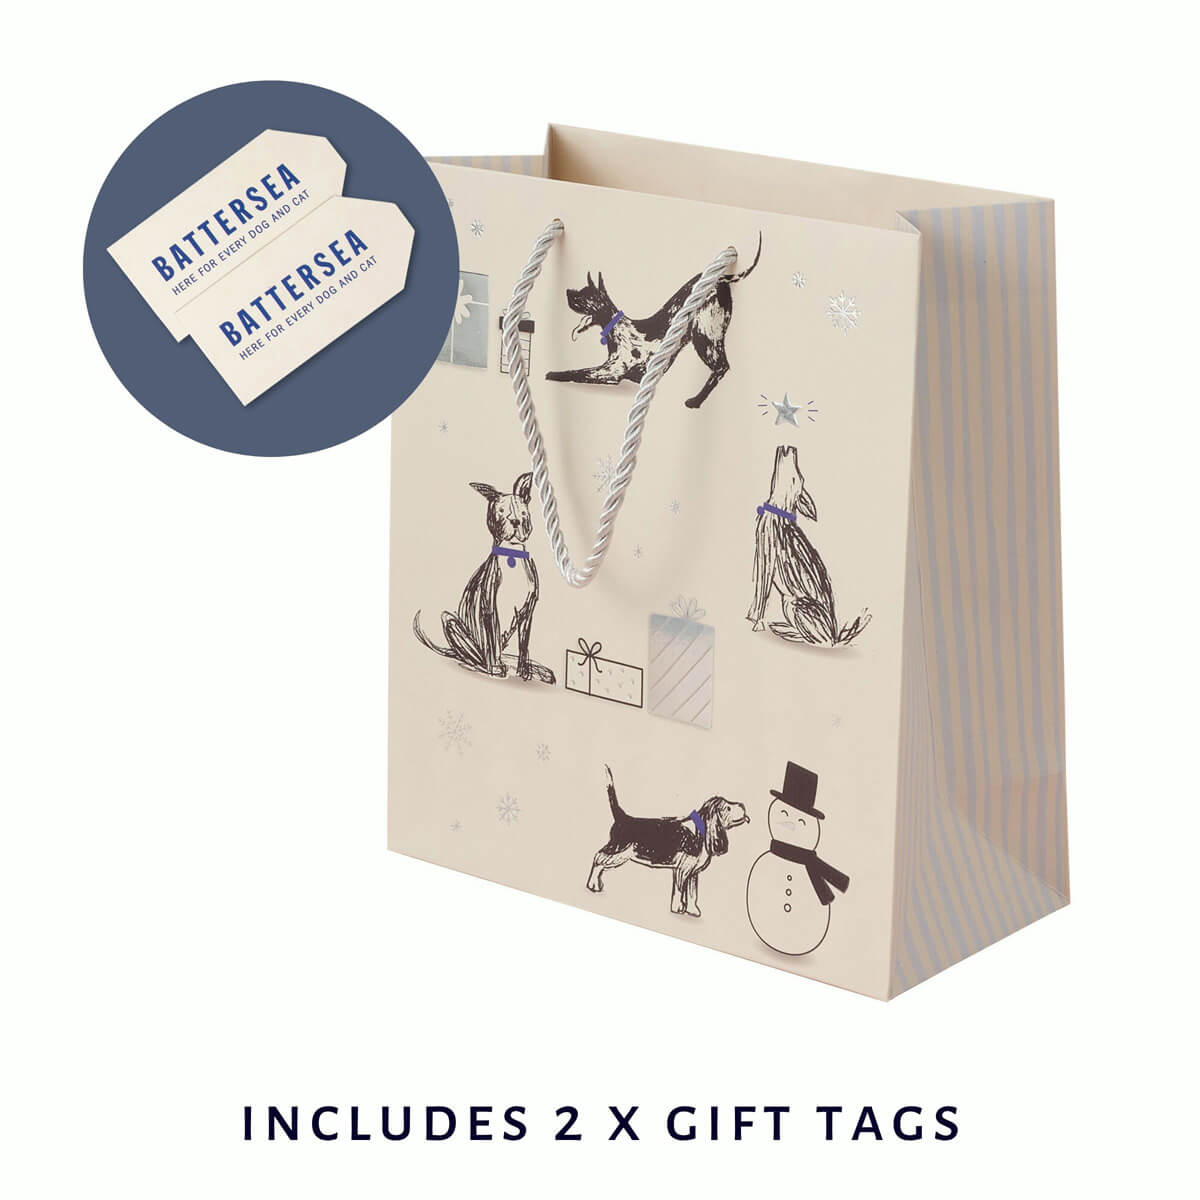 Battersea Dogs & Cats Home Christmas Gift Bag - Medium Sized - Close up Image of gift bag